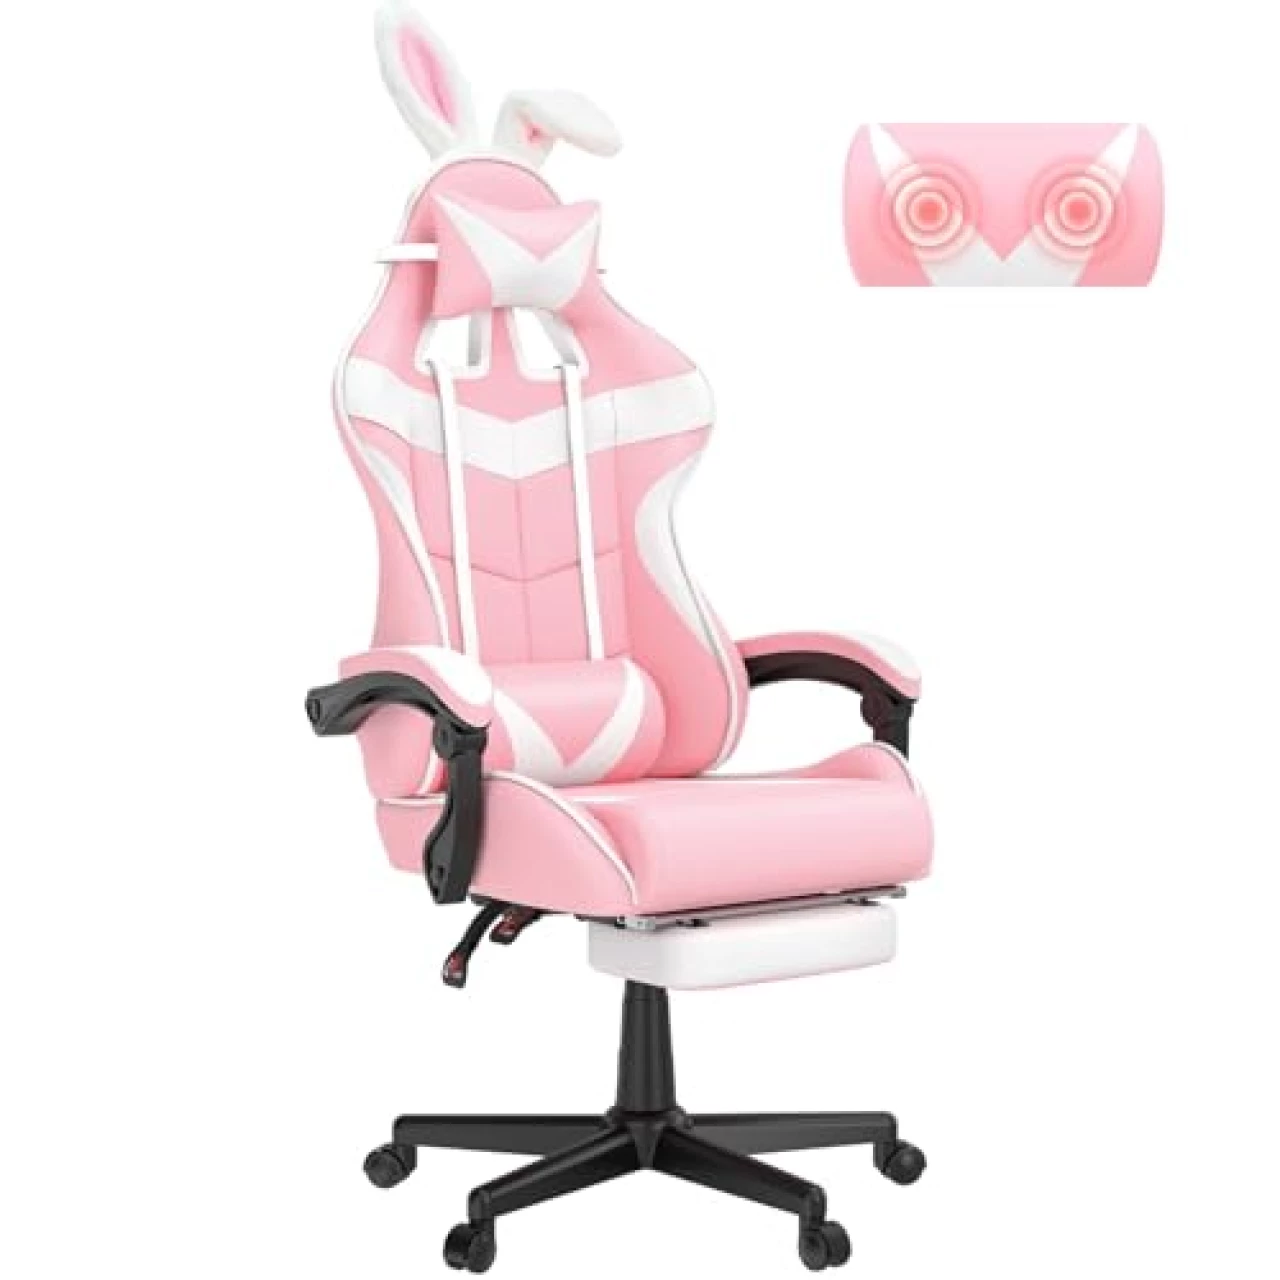 Soontrans Pink Gaming Chair with Footrest